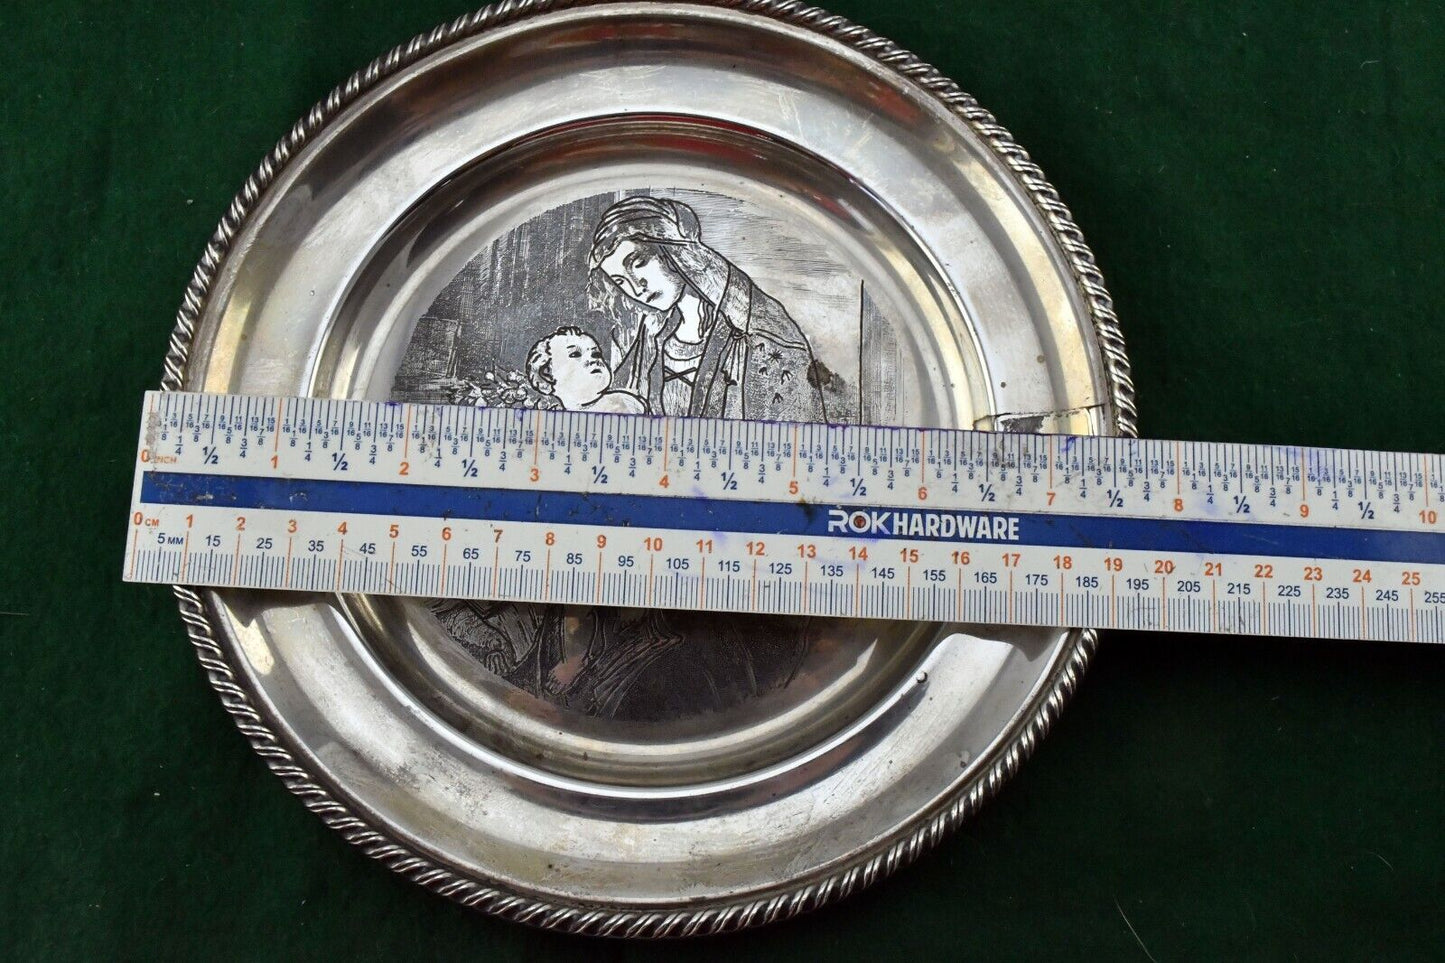 1972 Veneto Flair Italy 7 3/4" Sterling Silver Mother Mary & Child Plate 7.4oz